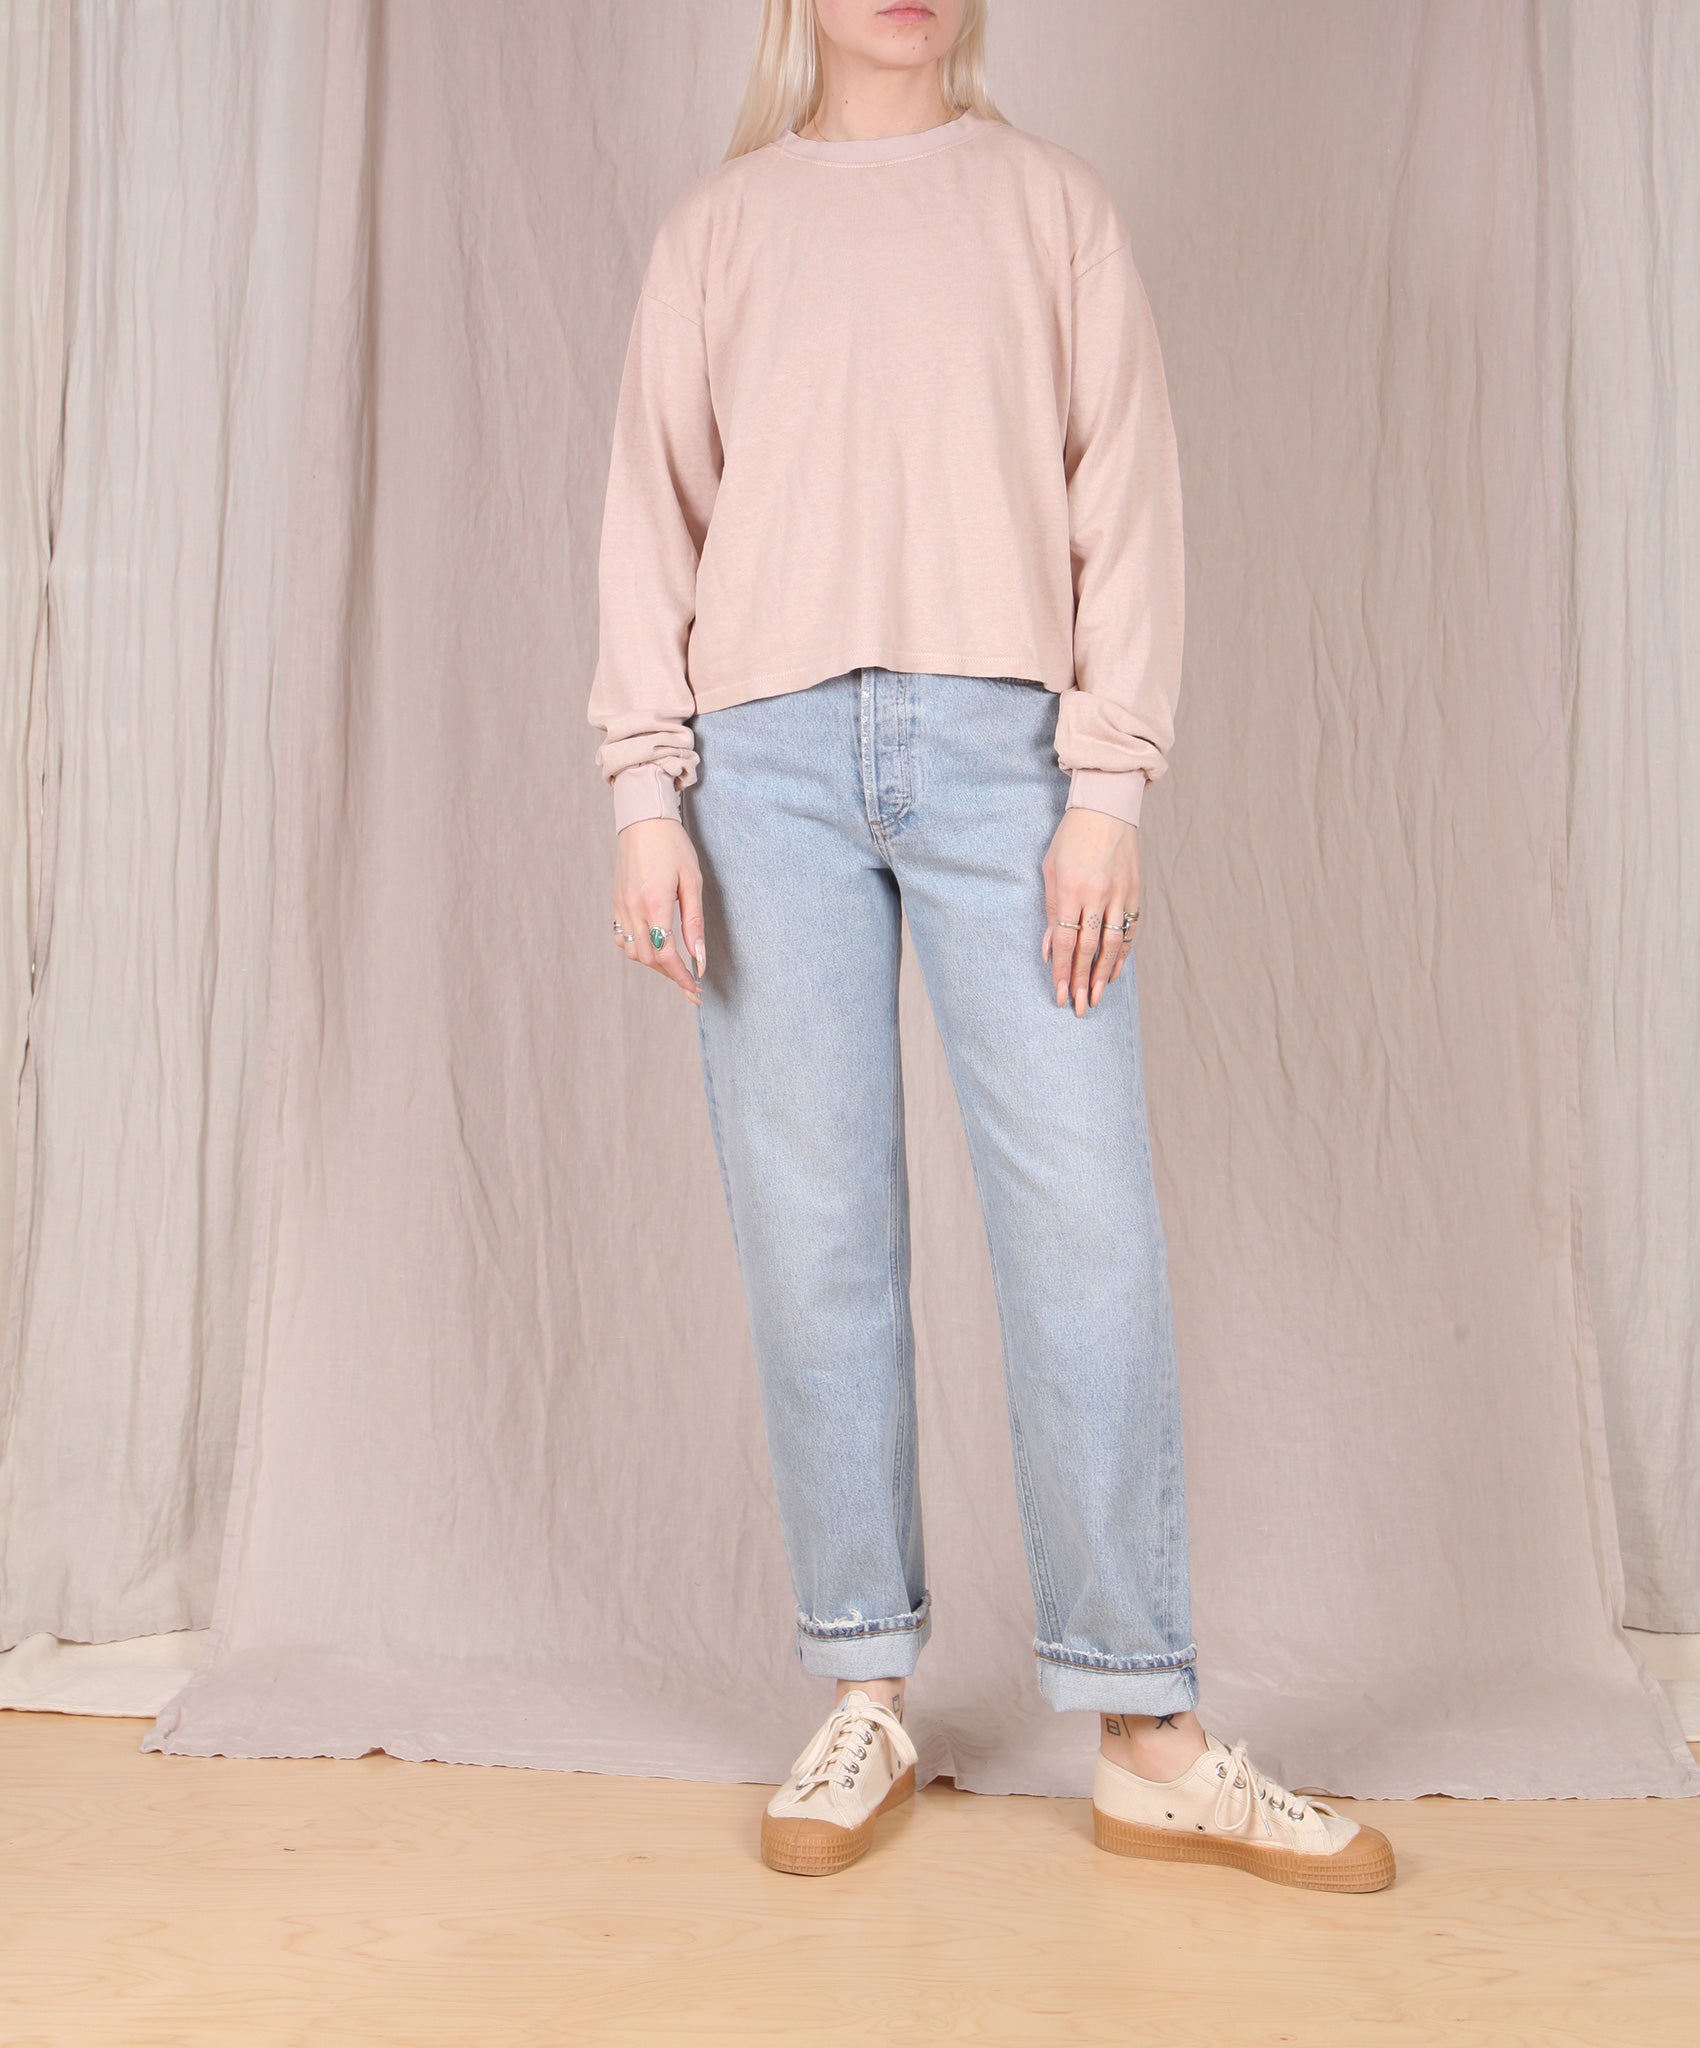 Jungmaven-Cropped Long Sleeve Tee // Dusty Pink